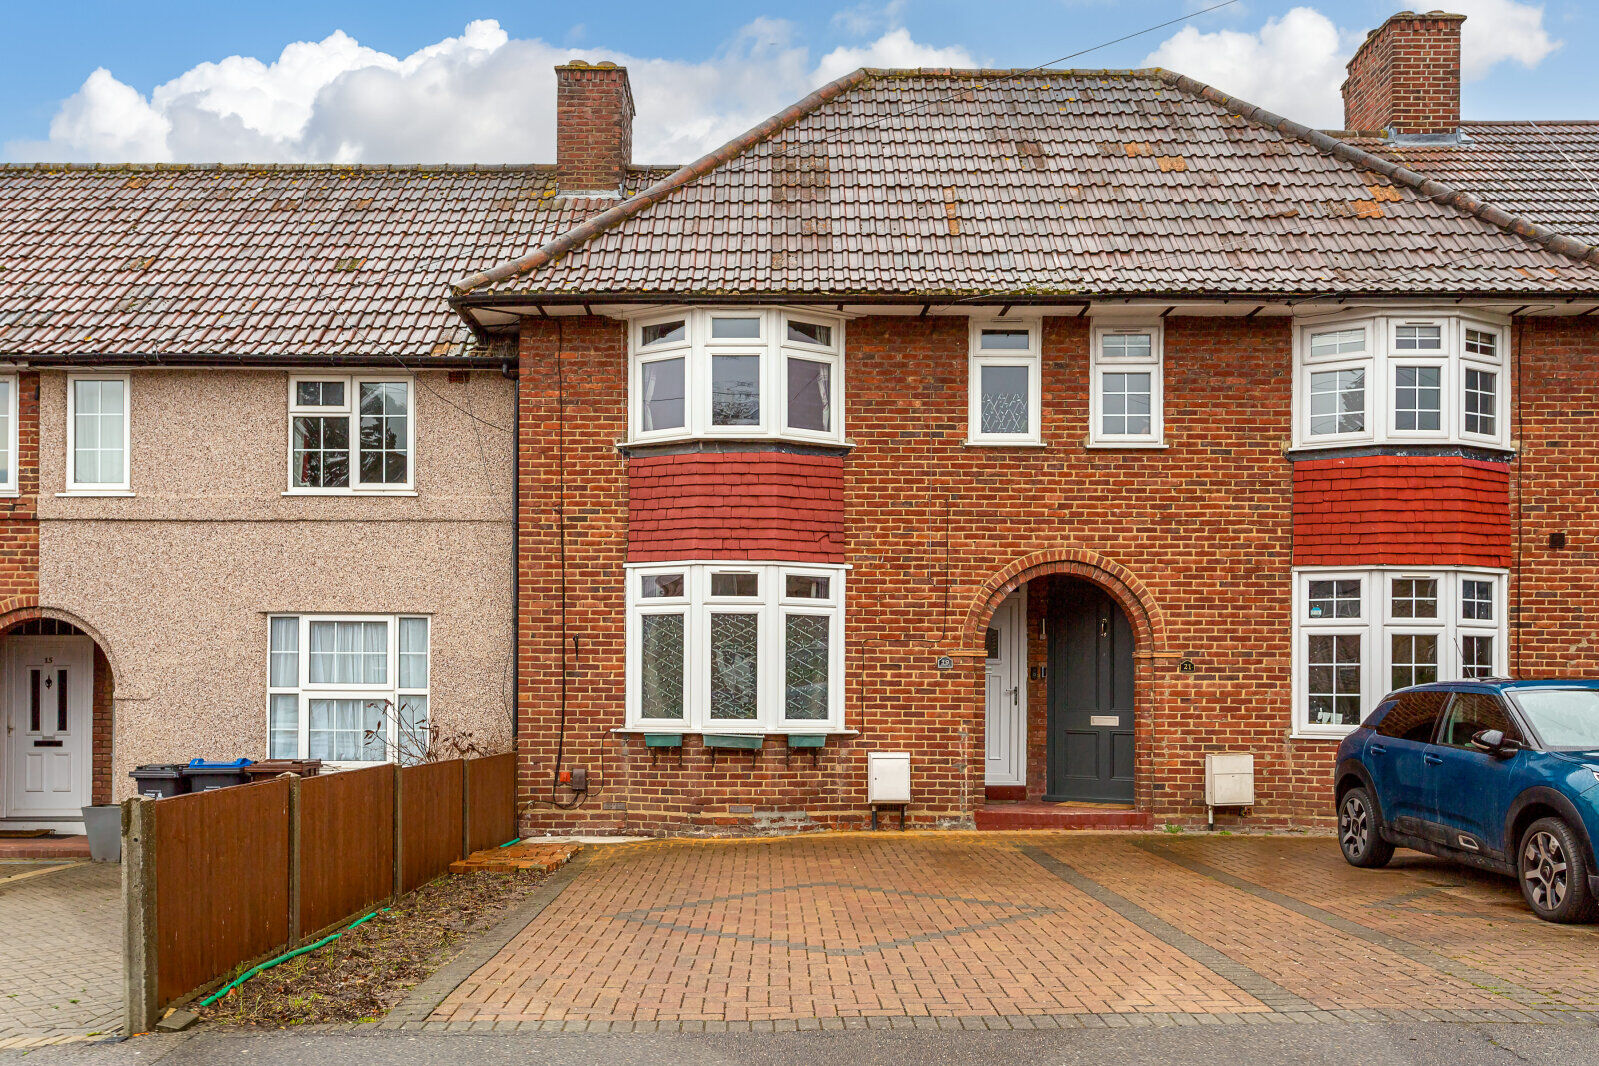 3 bedroom mid terraced house for sale Furness Road, Morden, SM4, main image